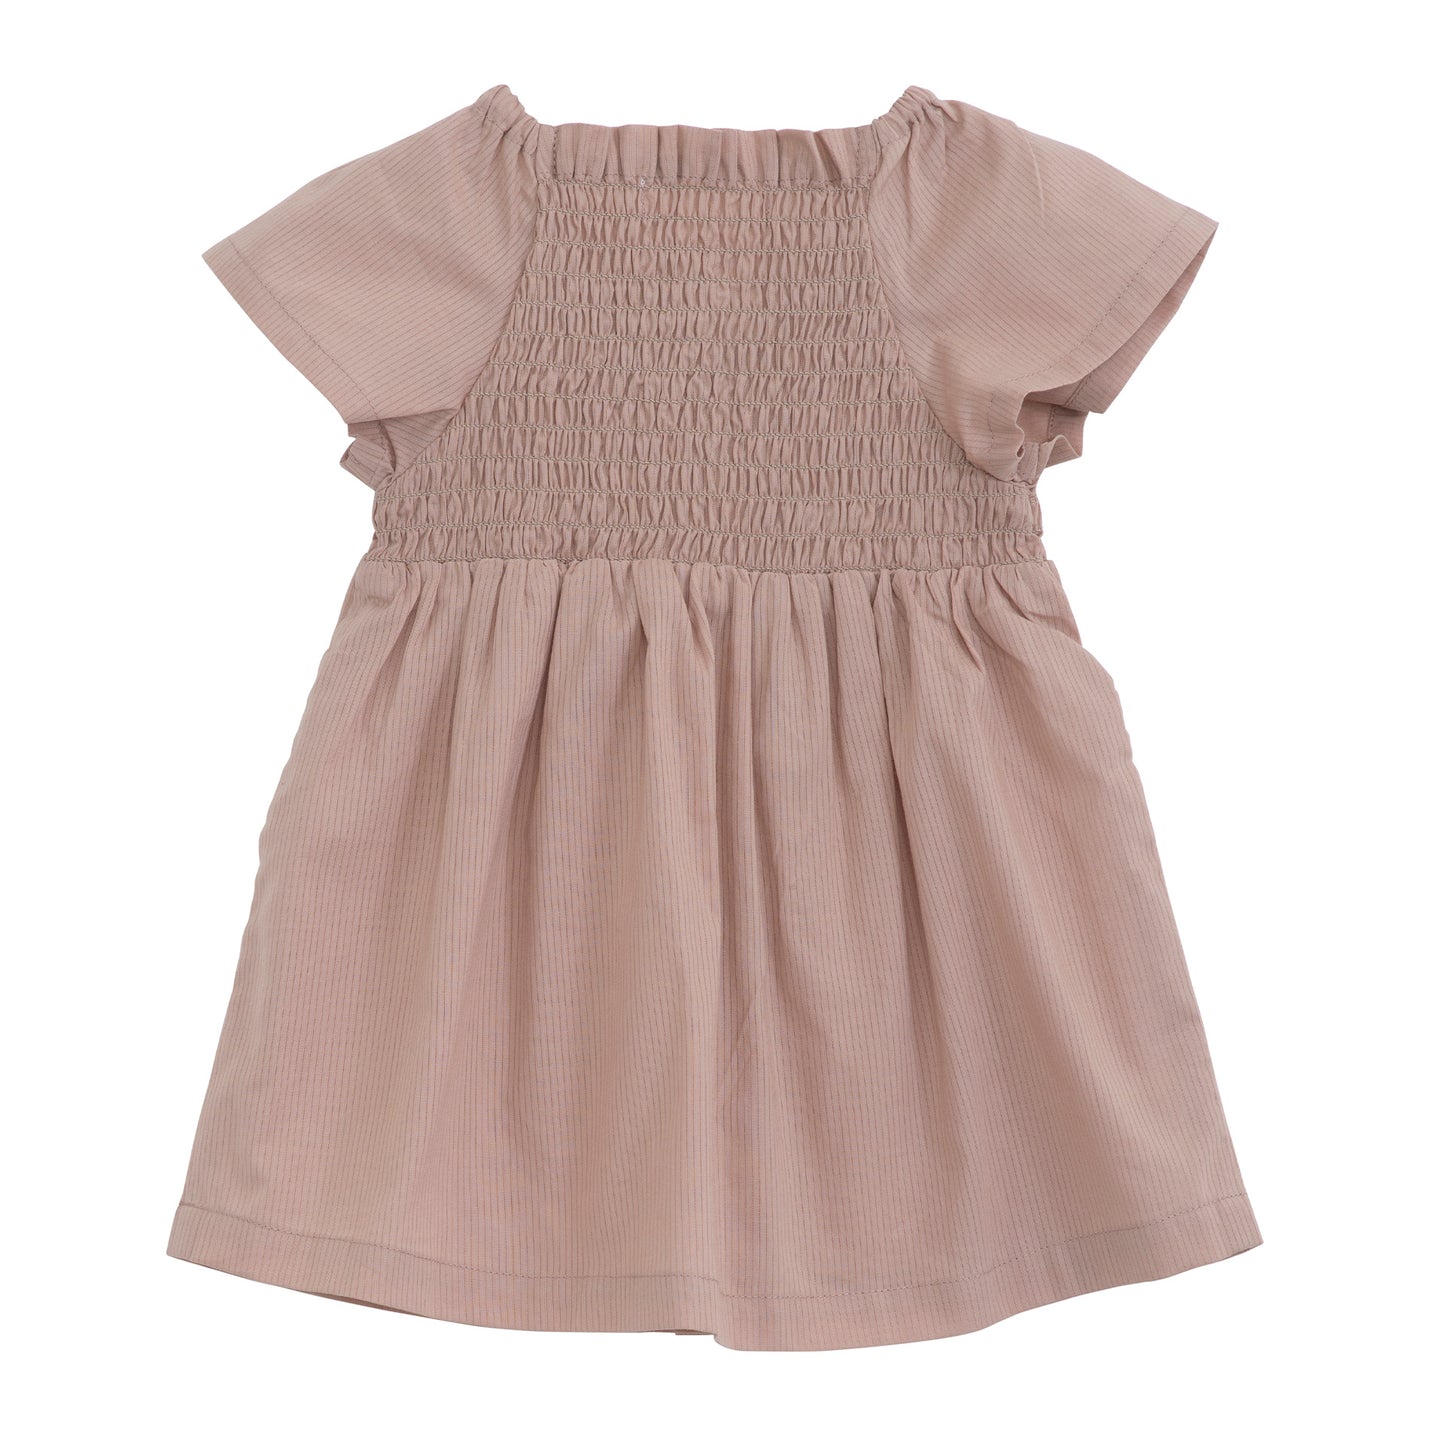 Baby girls Serendipity dress with smocking details and short sleeves.